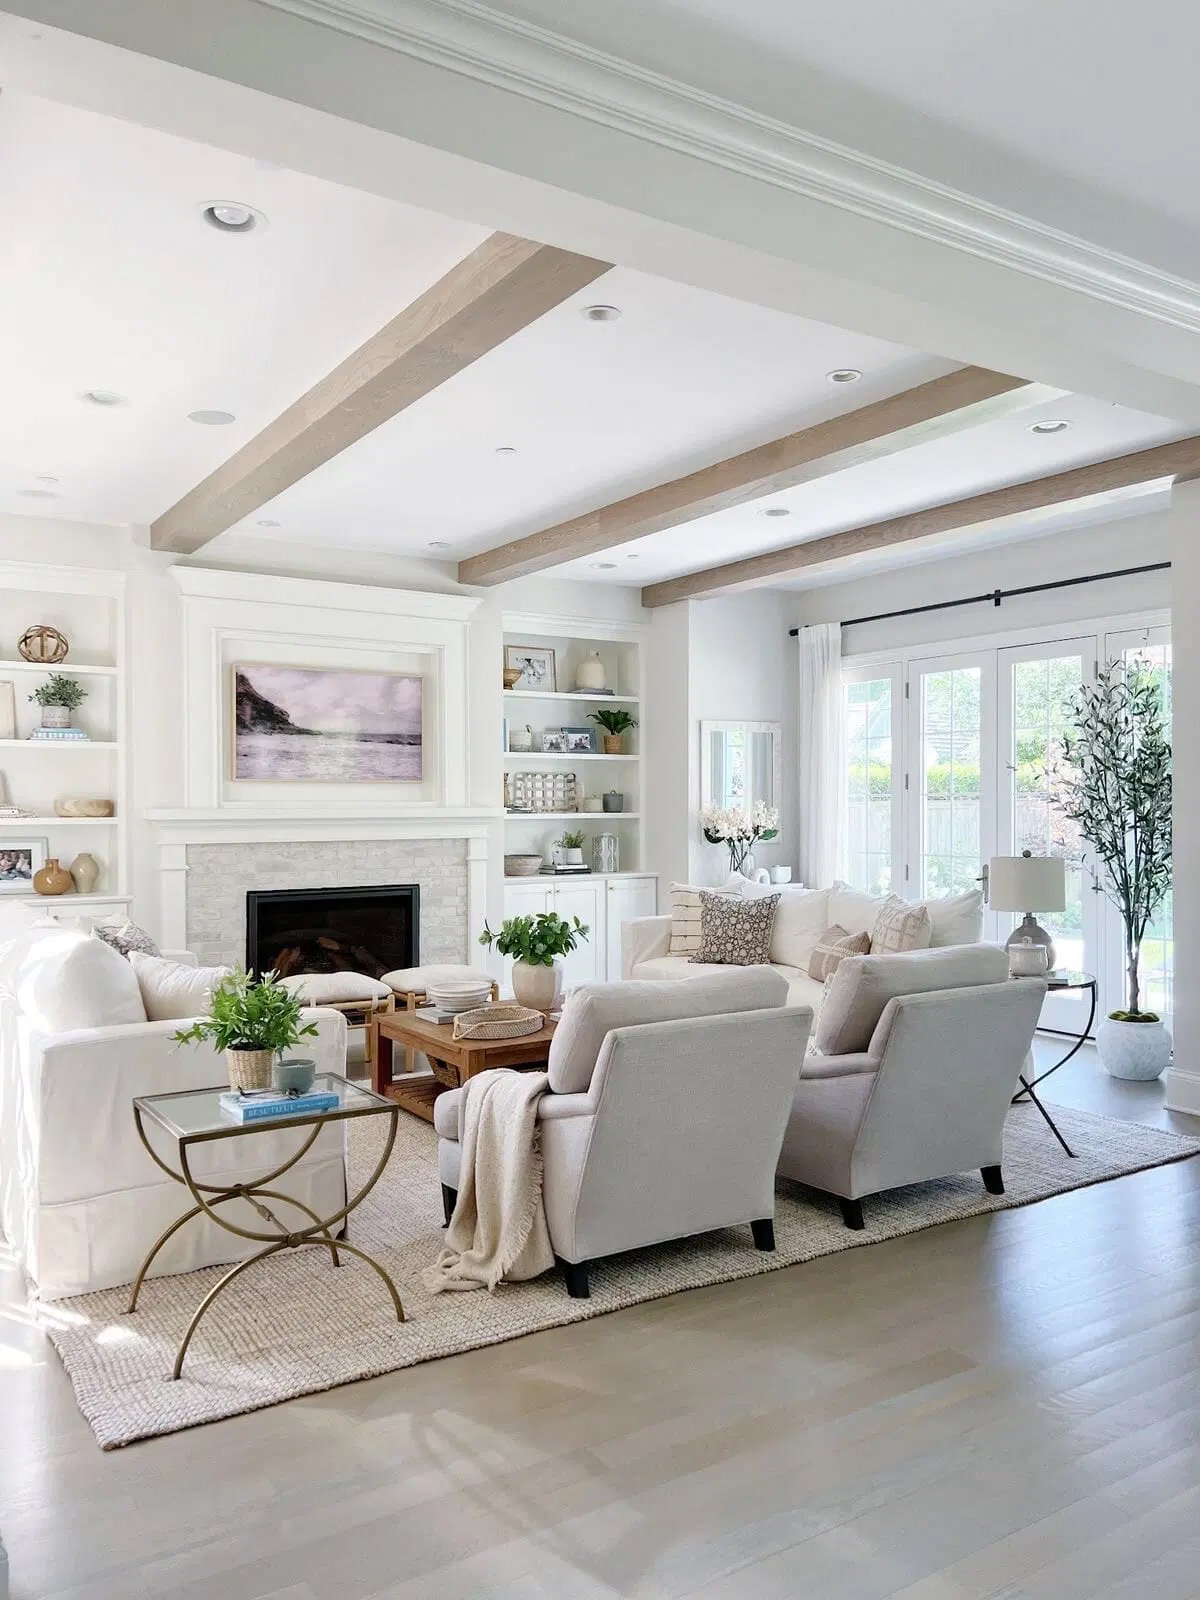 living room with classic gray walls, wood beams on the ceiling and light colored couches and chairs